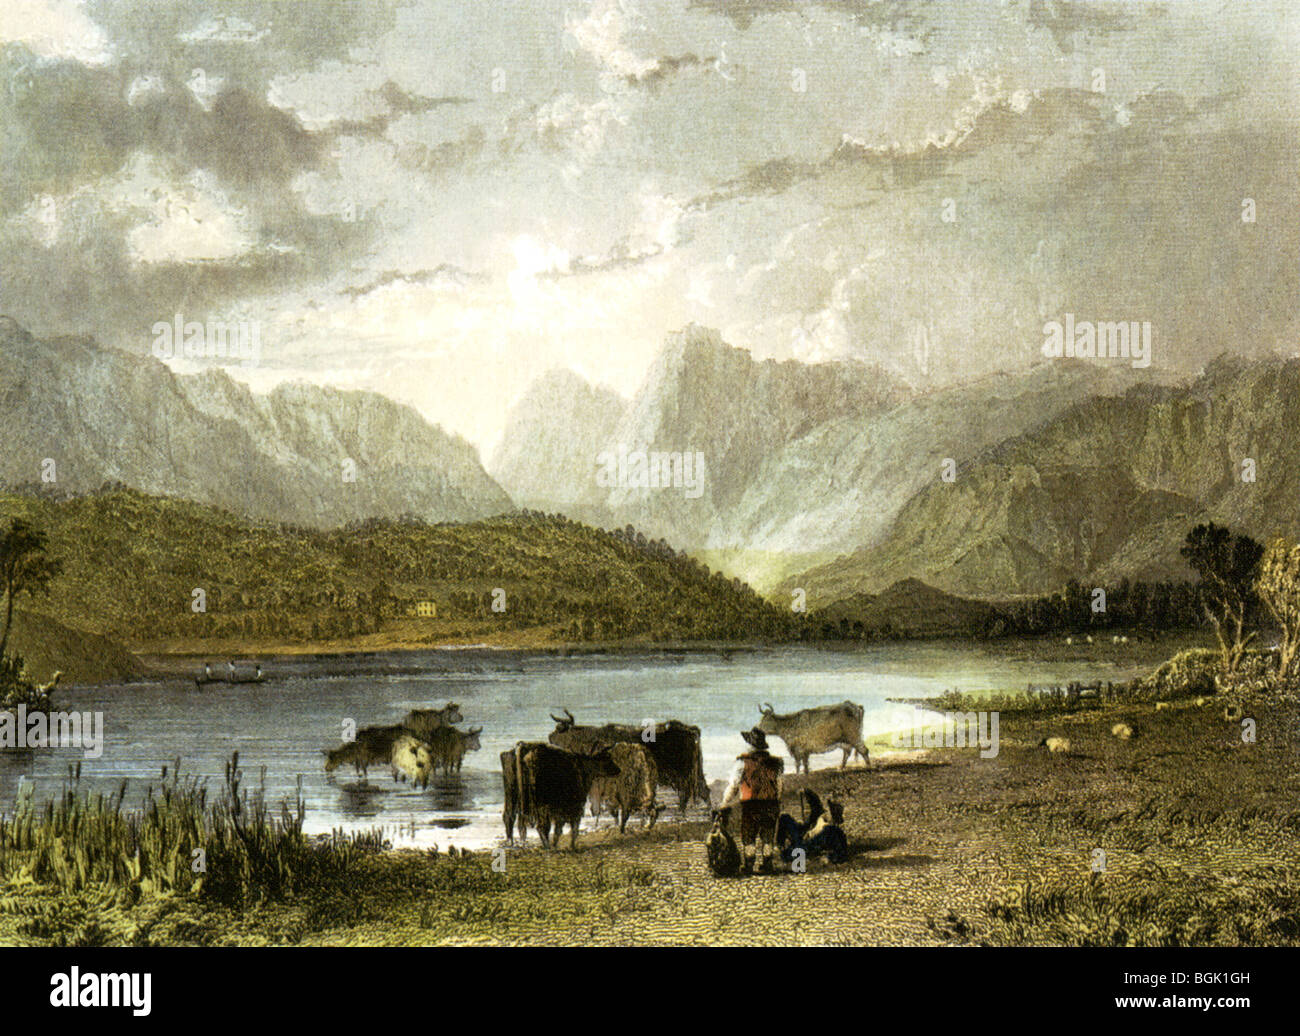 LAKE DISTRICT - Elterwater e The Langdale Pikes in una incisione 1832 Foto Stock